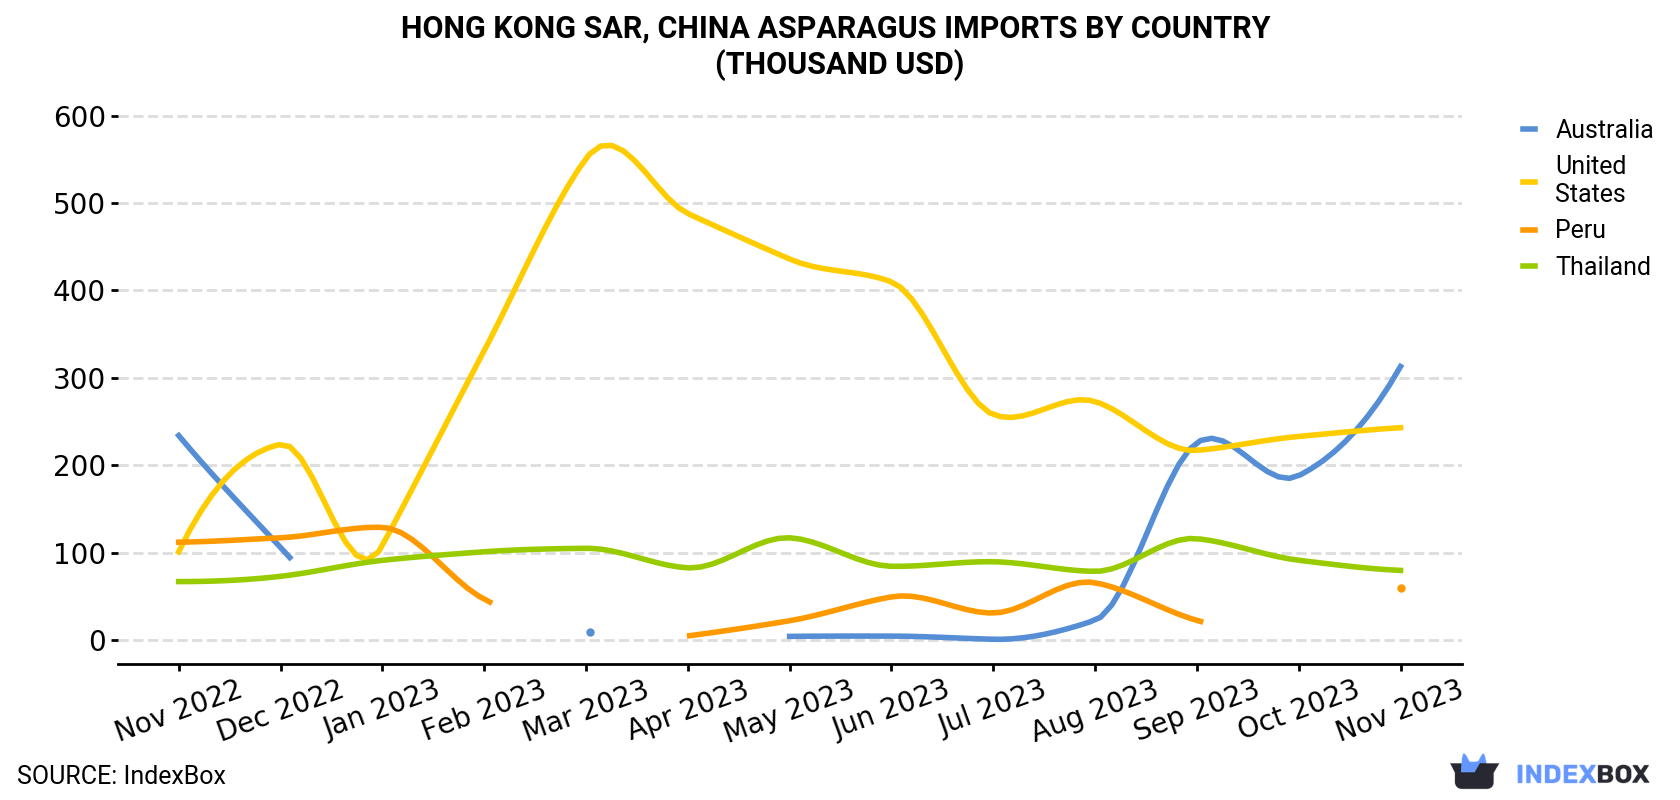 Hong Kong Asparagus Imports By Country (Thousand USD)